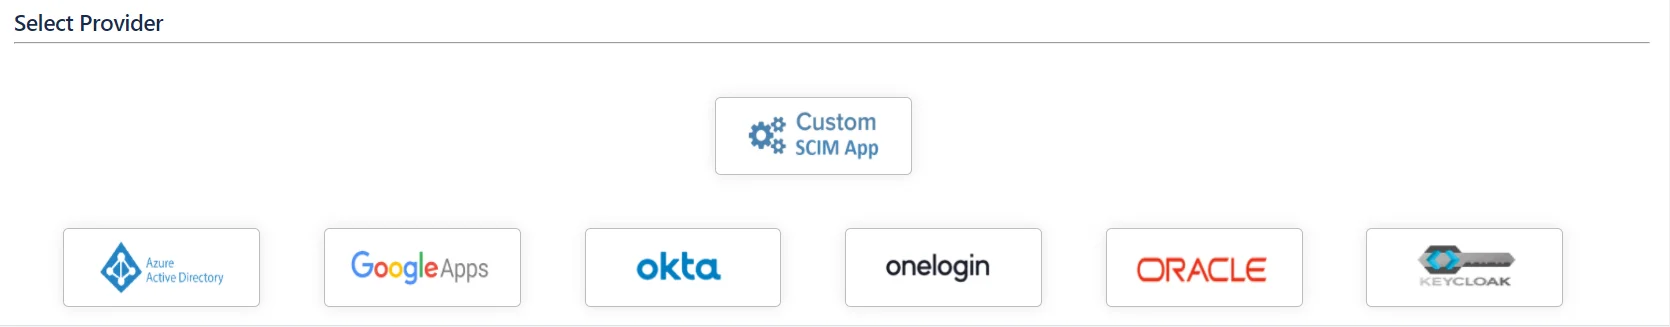 sync users, groups and directory details using Okta into Jira and Confluence